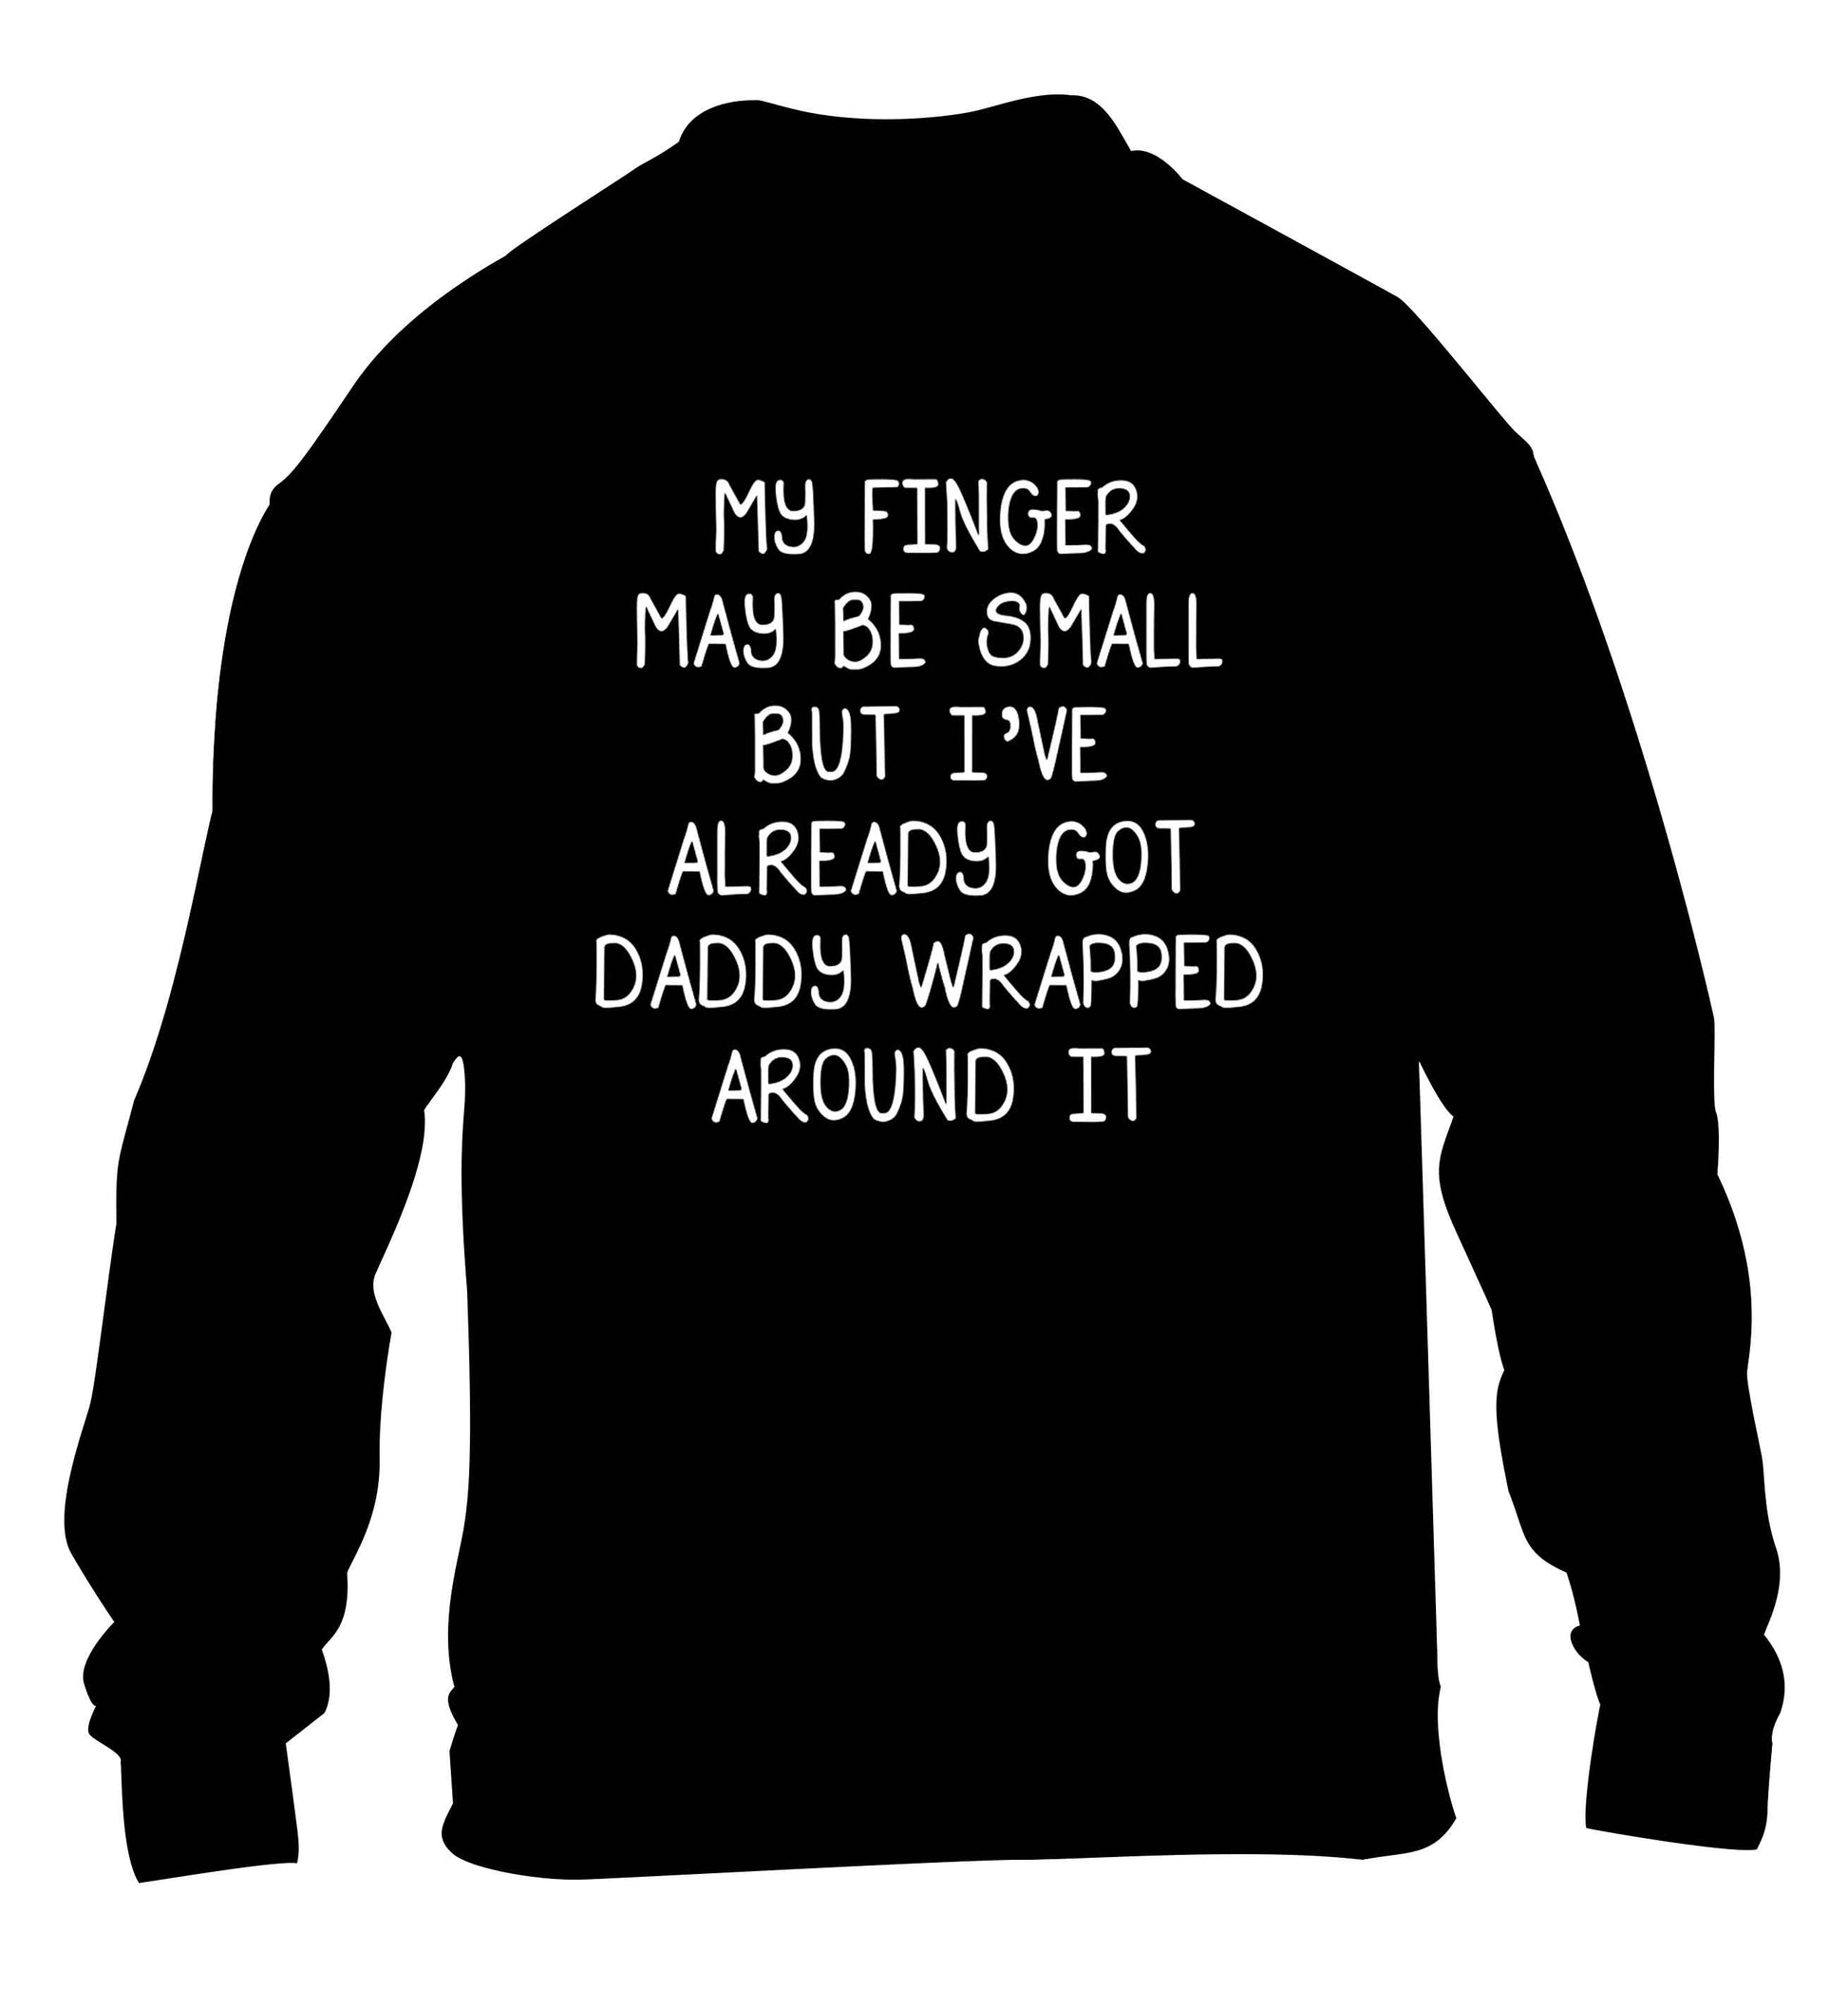 My finger may be small but I've already got daddy wrapped around it children's black sweater 12-13 Years